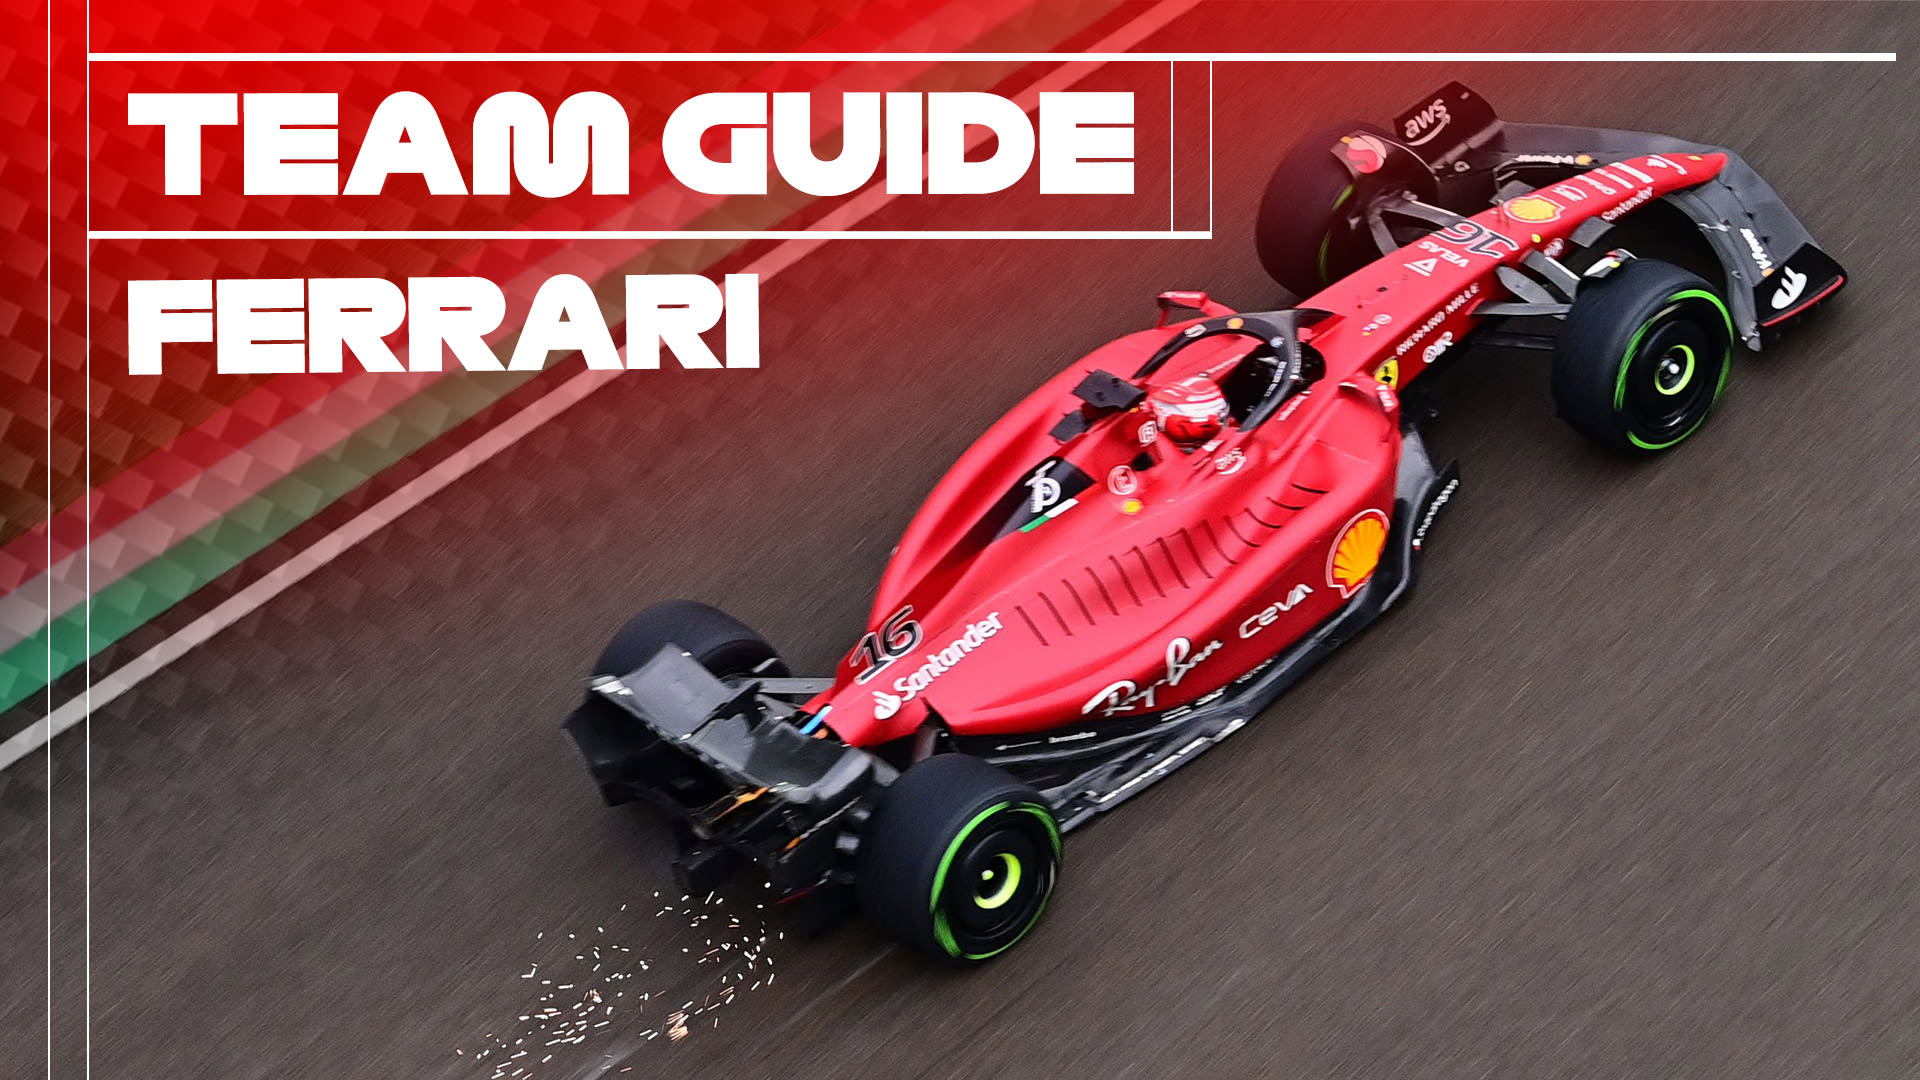 TEAM GUIDE: Get up to speed on Ferrari and their rich F1 history